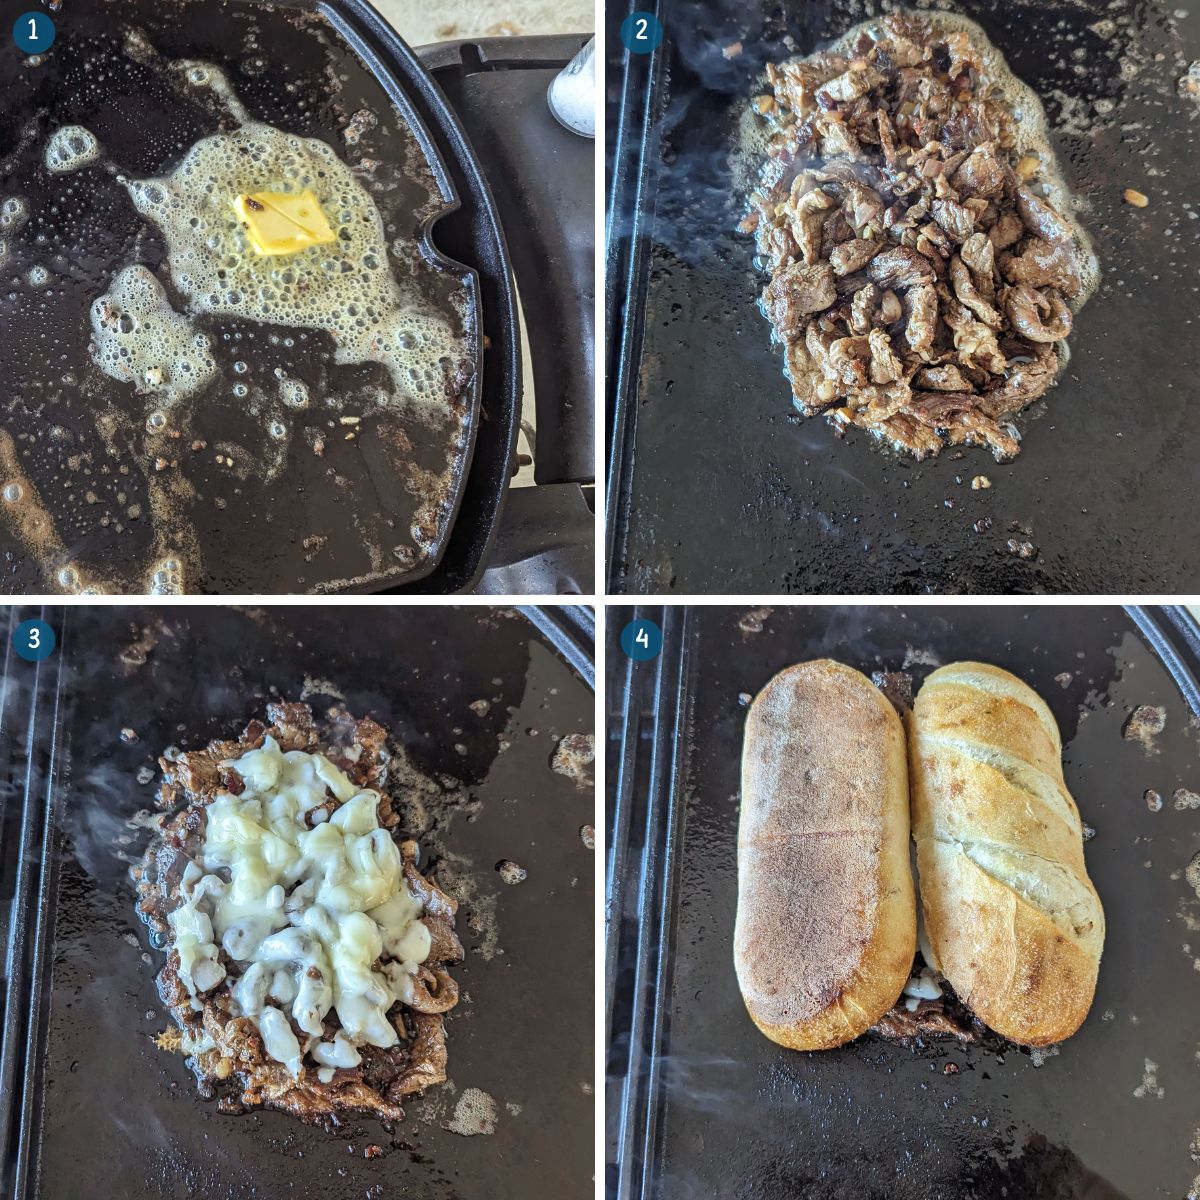 Melting the cheese and assembling the Weber Q Philly Cheesesteak Sandwich